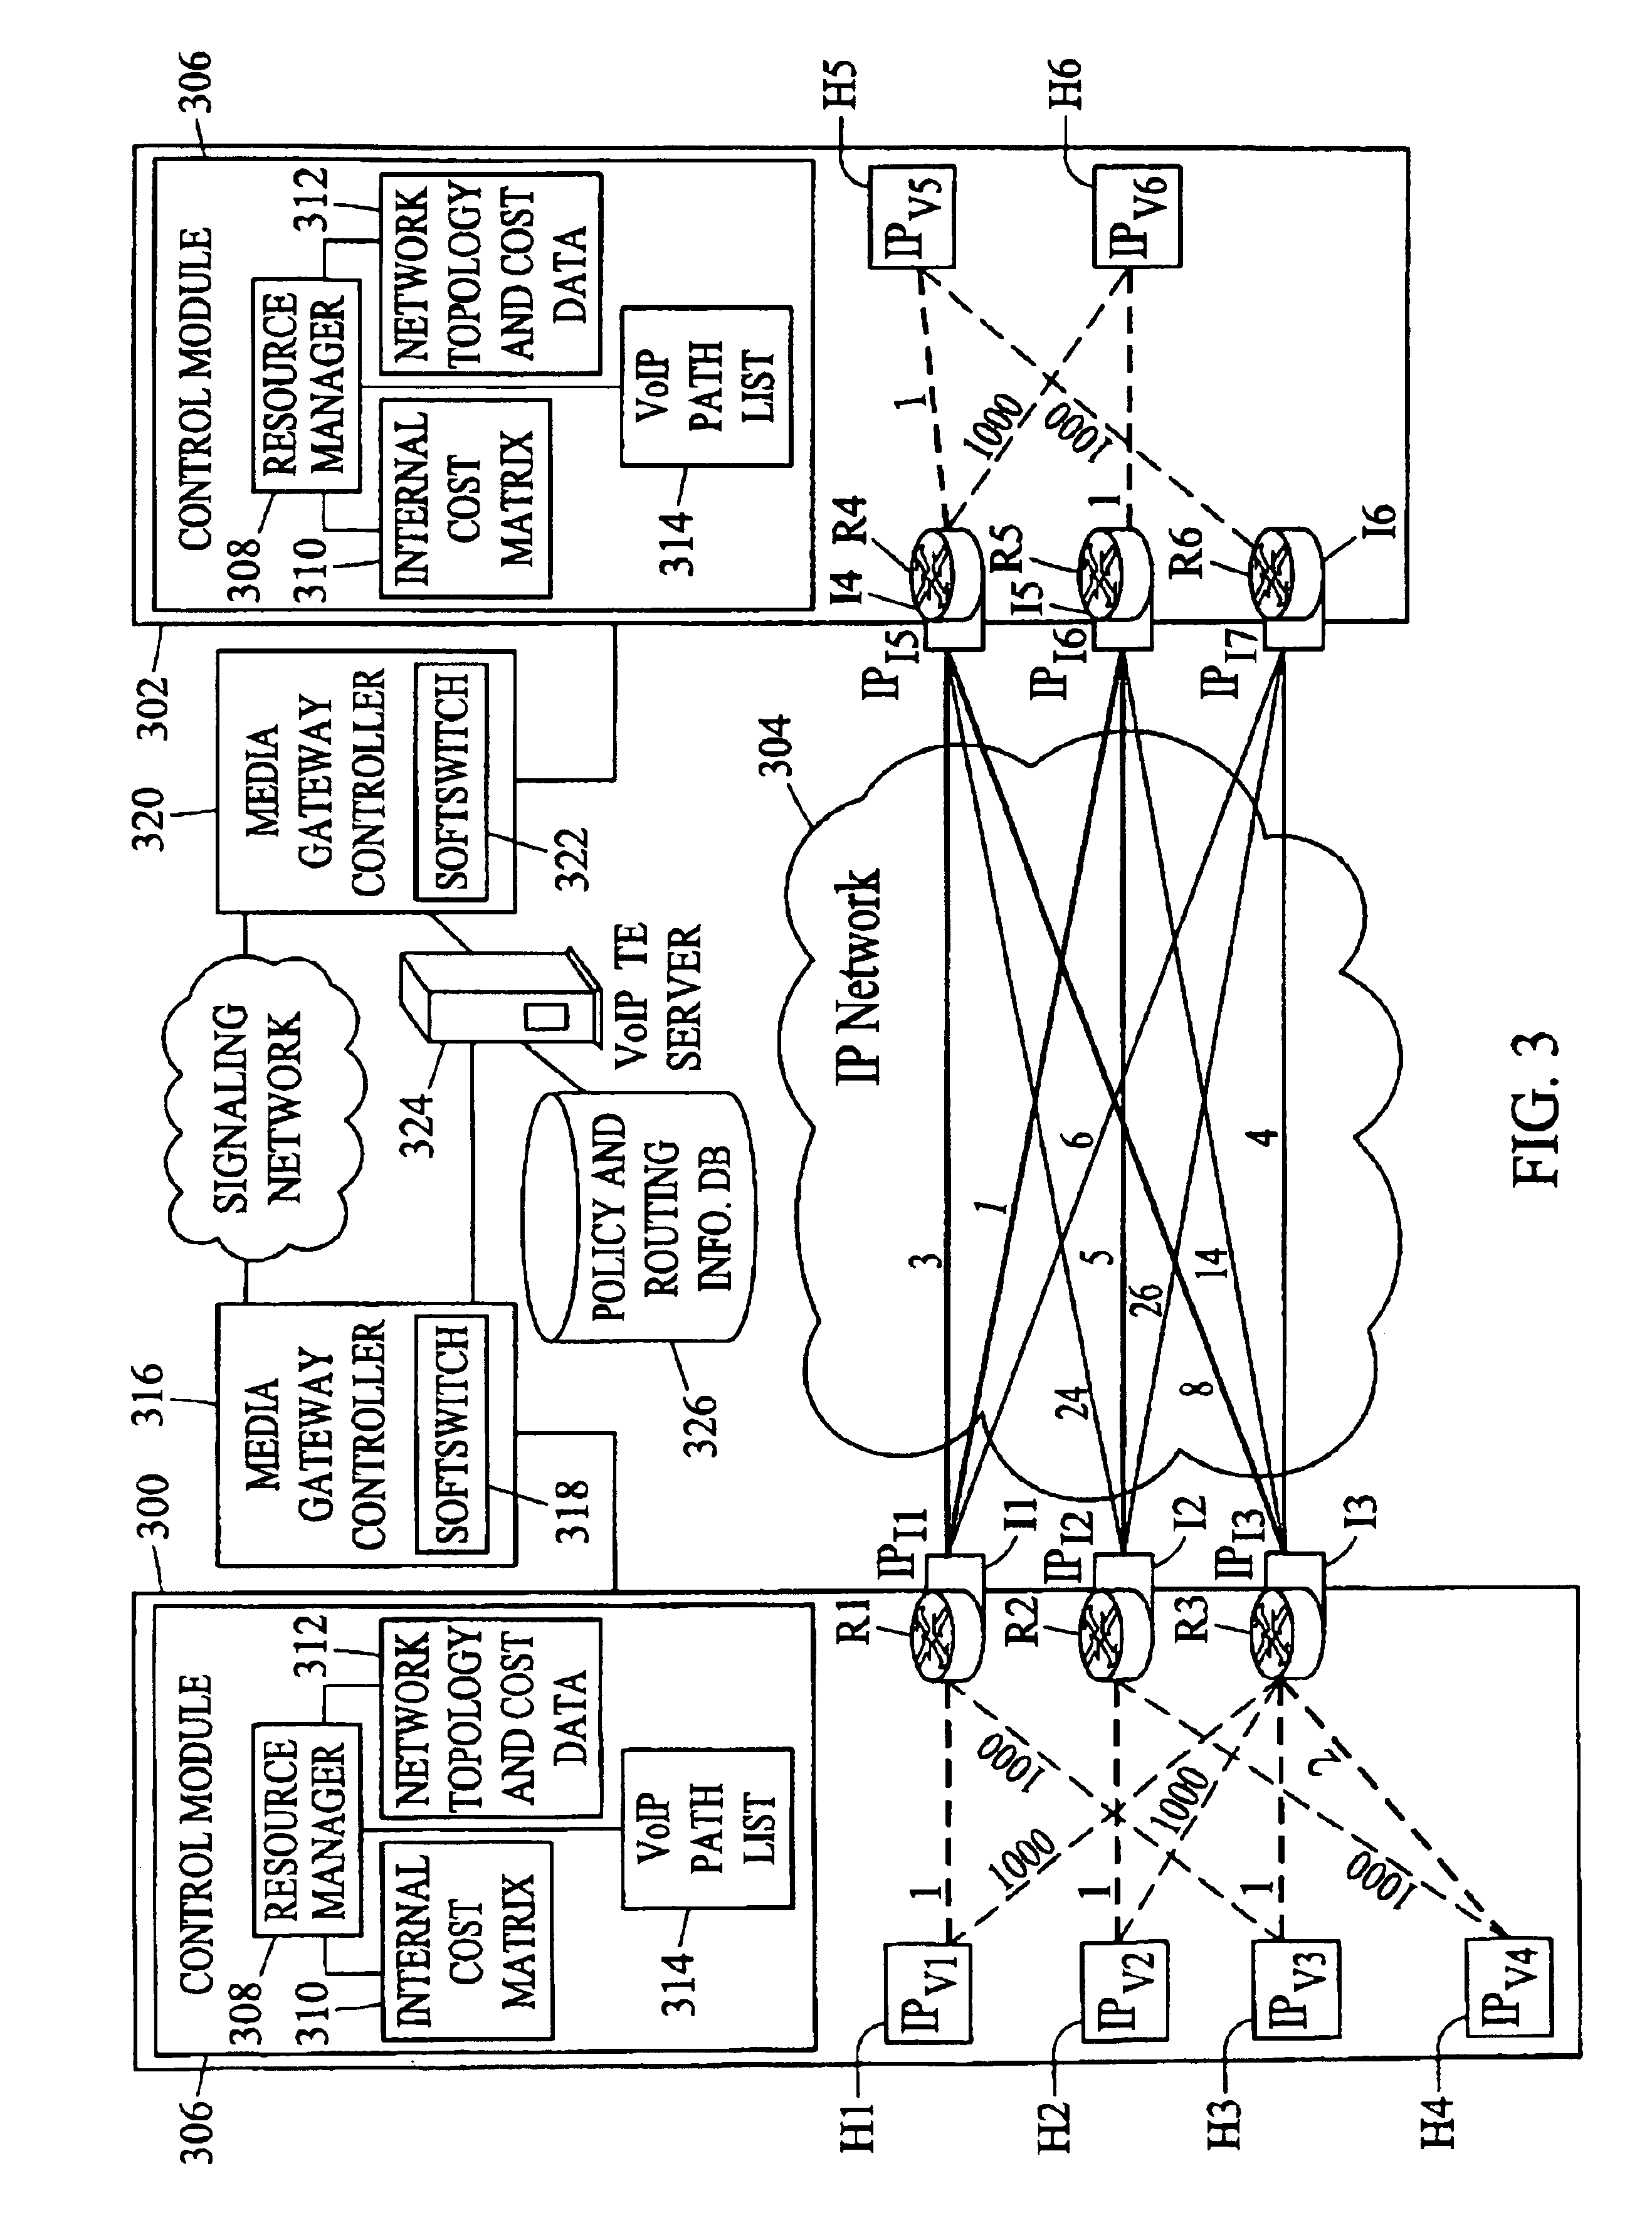 Methods, systems, and computer program products for voice over IP (VoIP) traffic engineering and path resilience using network-aware media gateway